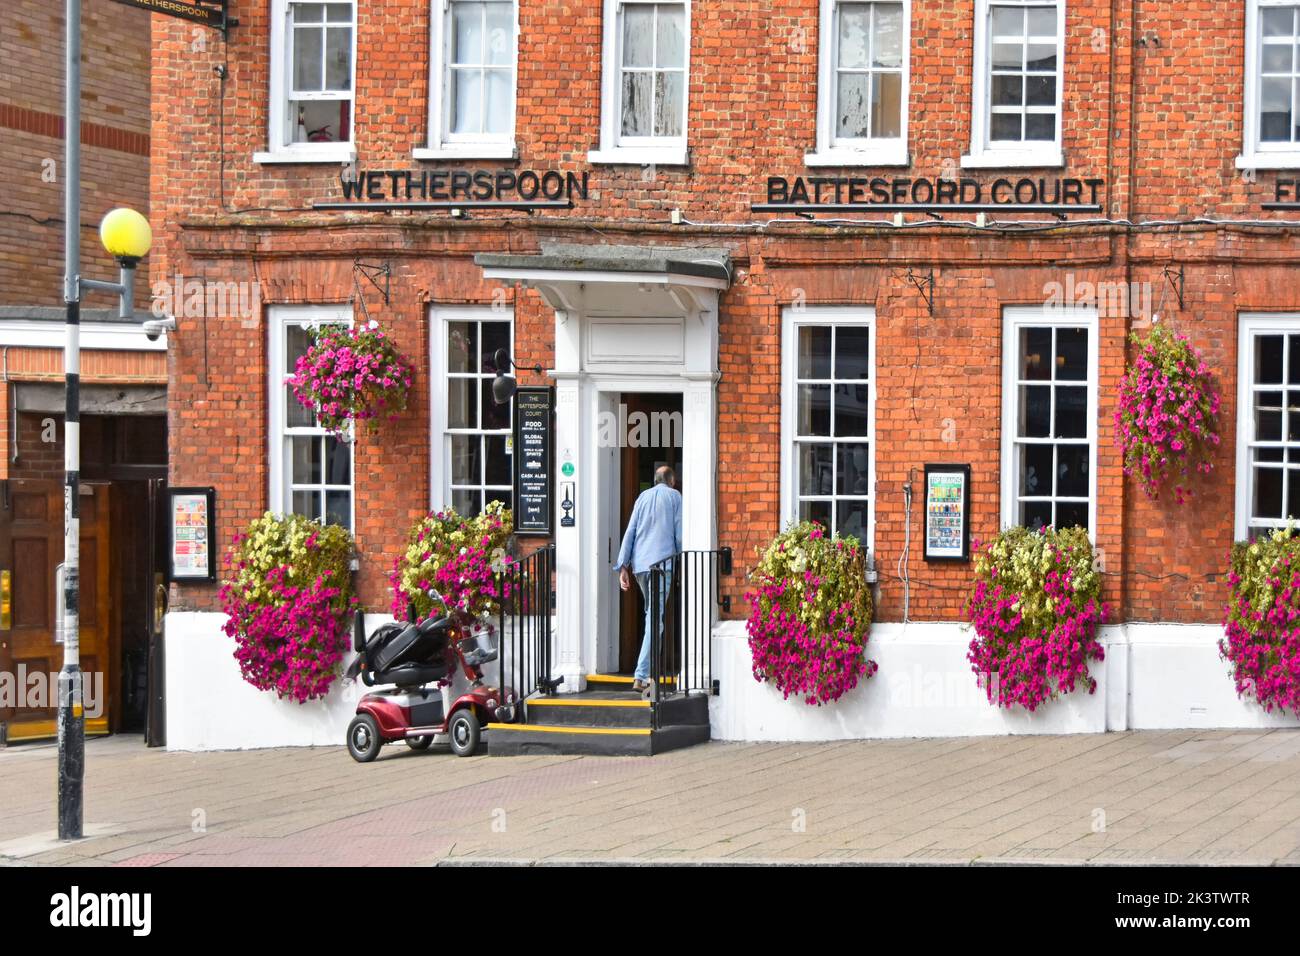 Battesford Court historical 16th-century building now Weatherspoon pub and restaurant decorated outside with colourful summer flowers Witham Essex UK Stock Photo